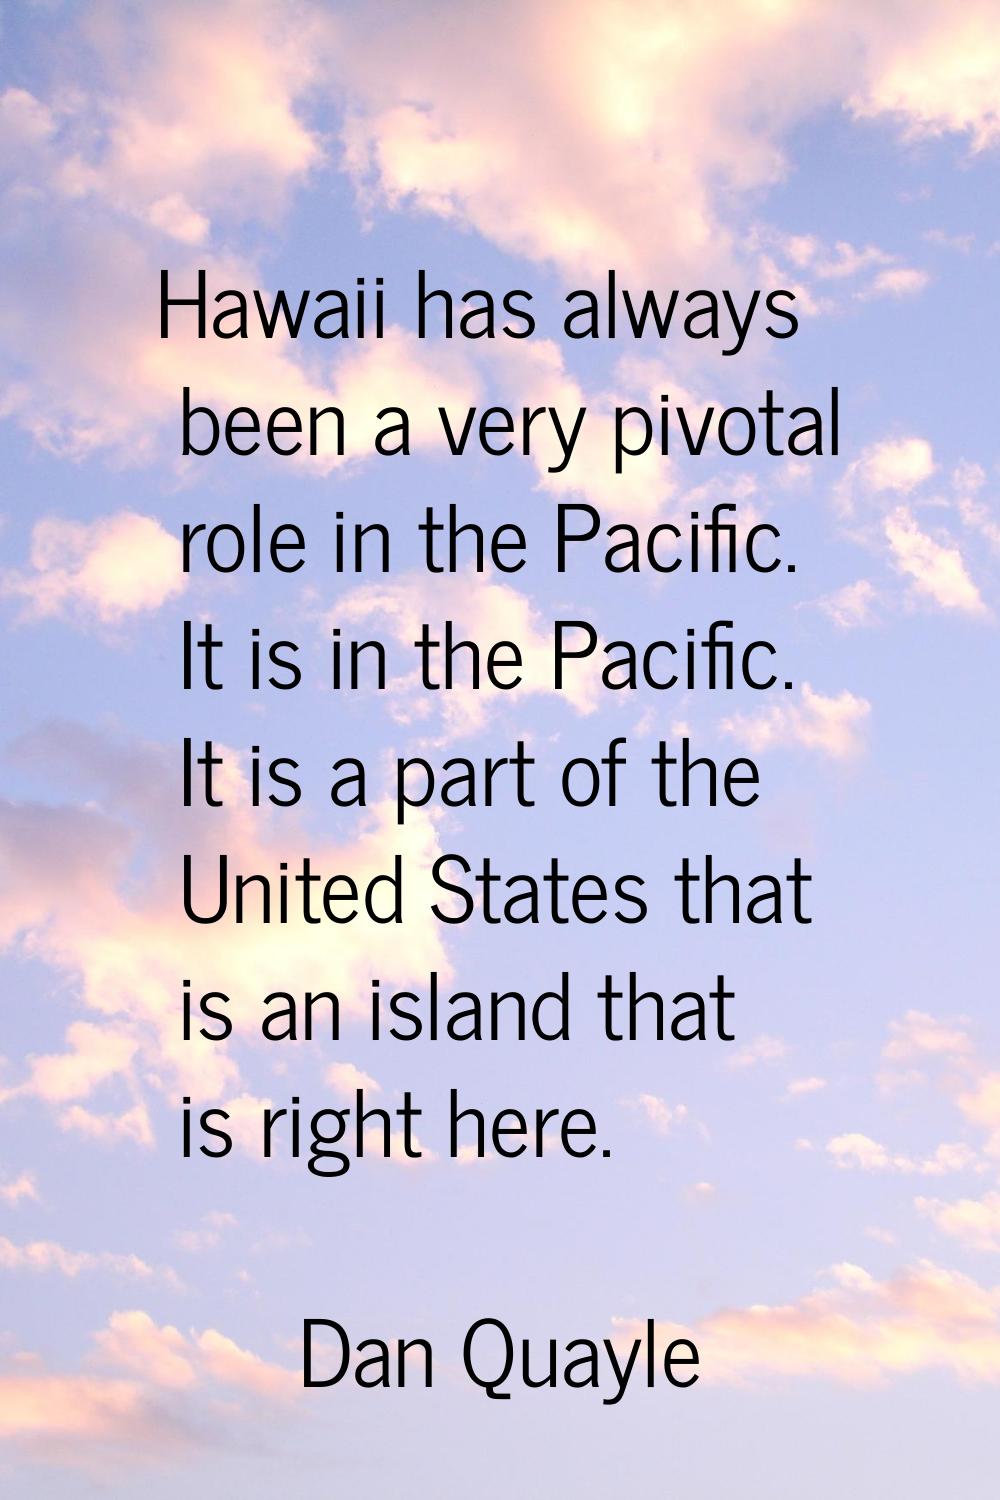 Hawaii has always been a very pivotal role in the Pacific. It is in the Pacific. It is a part of th